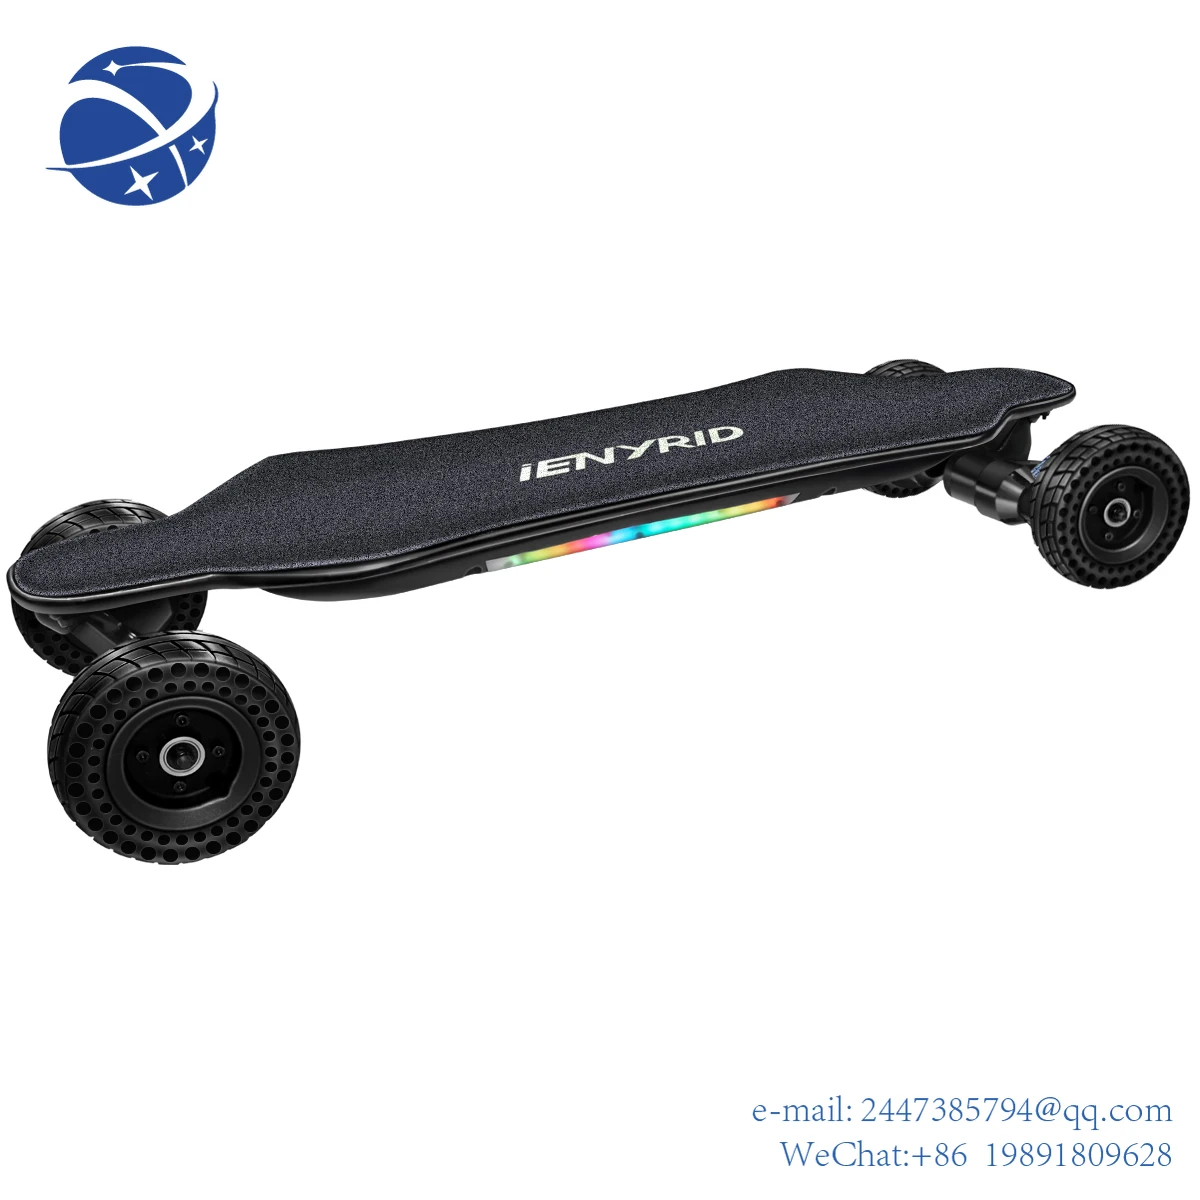 Yun YiUSA warehouse 4 wheel Electric SUV-skateboard Fast delivery time FCC ROHS CE electric skateboard is best склад the warehouse